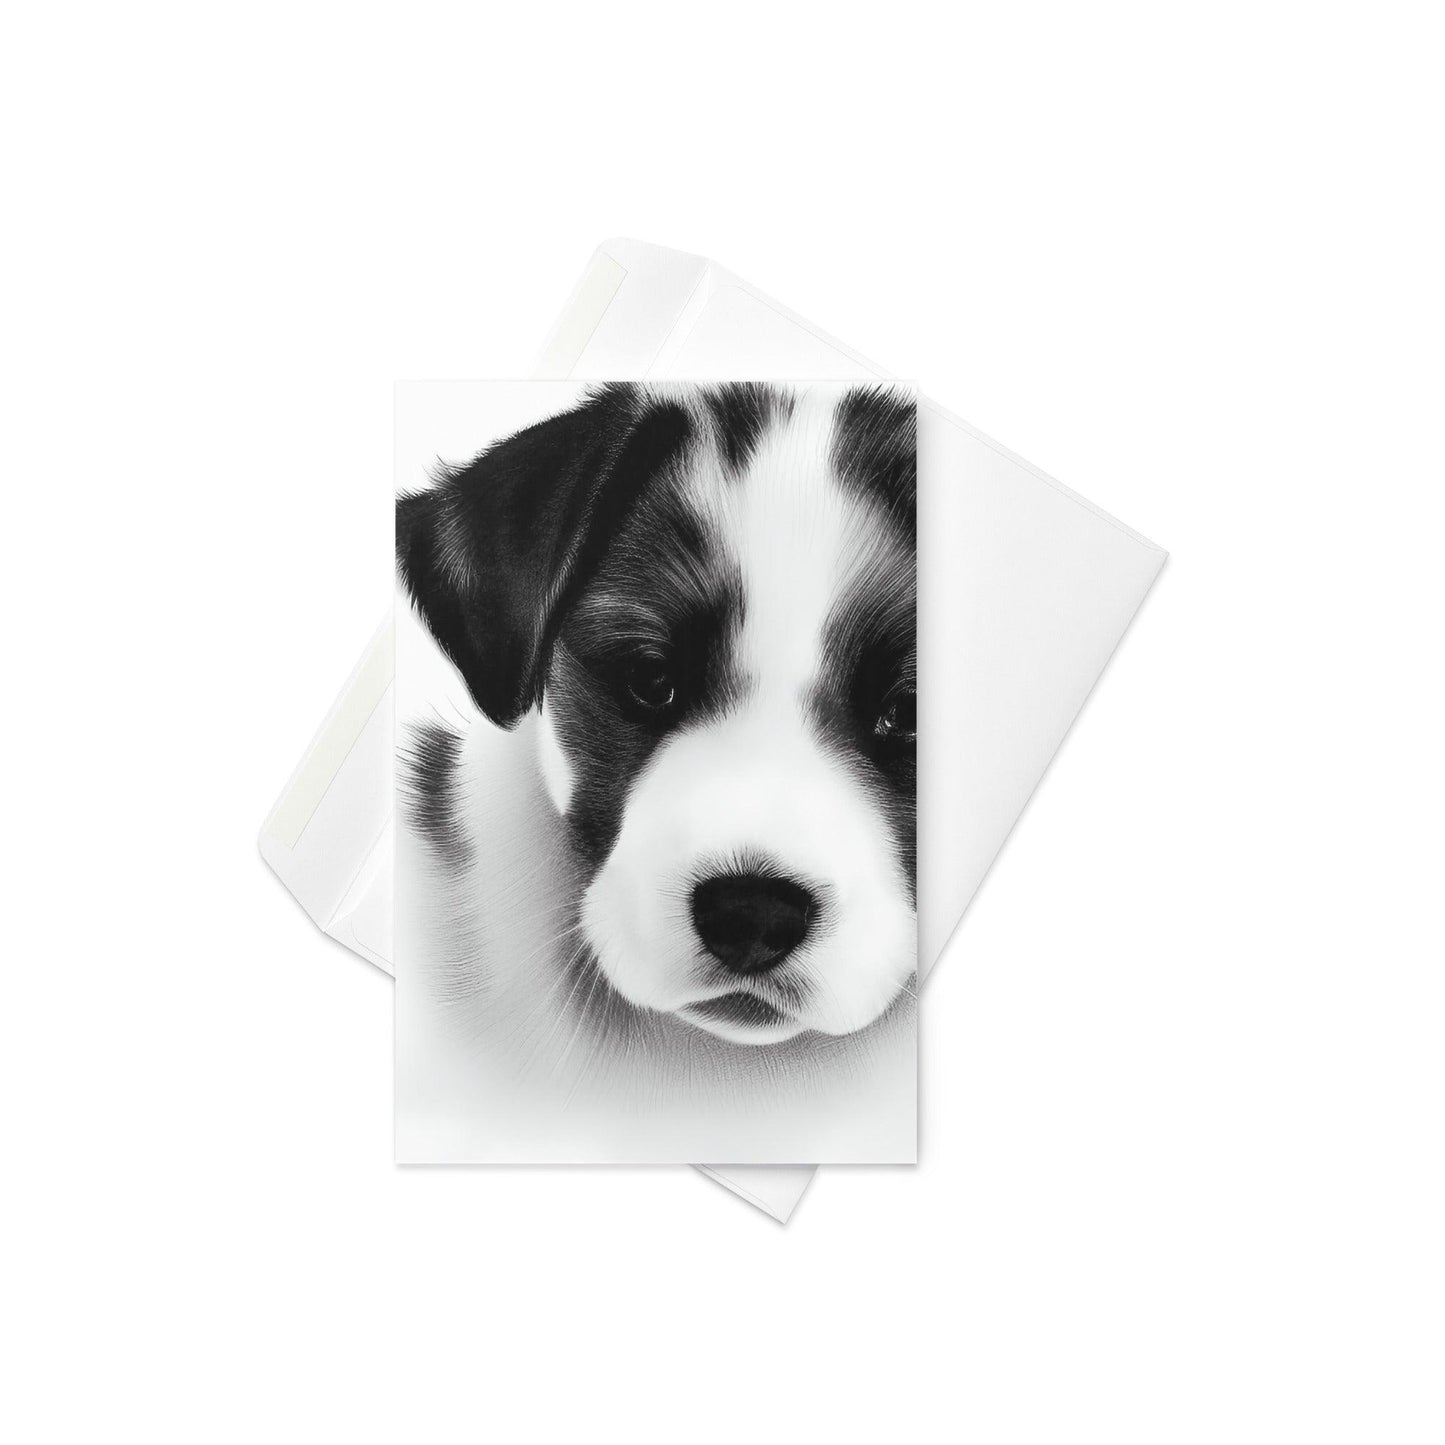 Puppy Love 5 - Note Card - iSAW Company